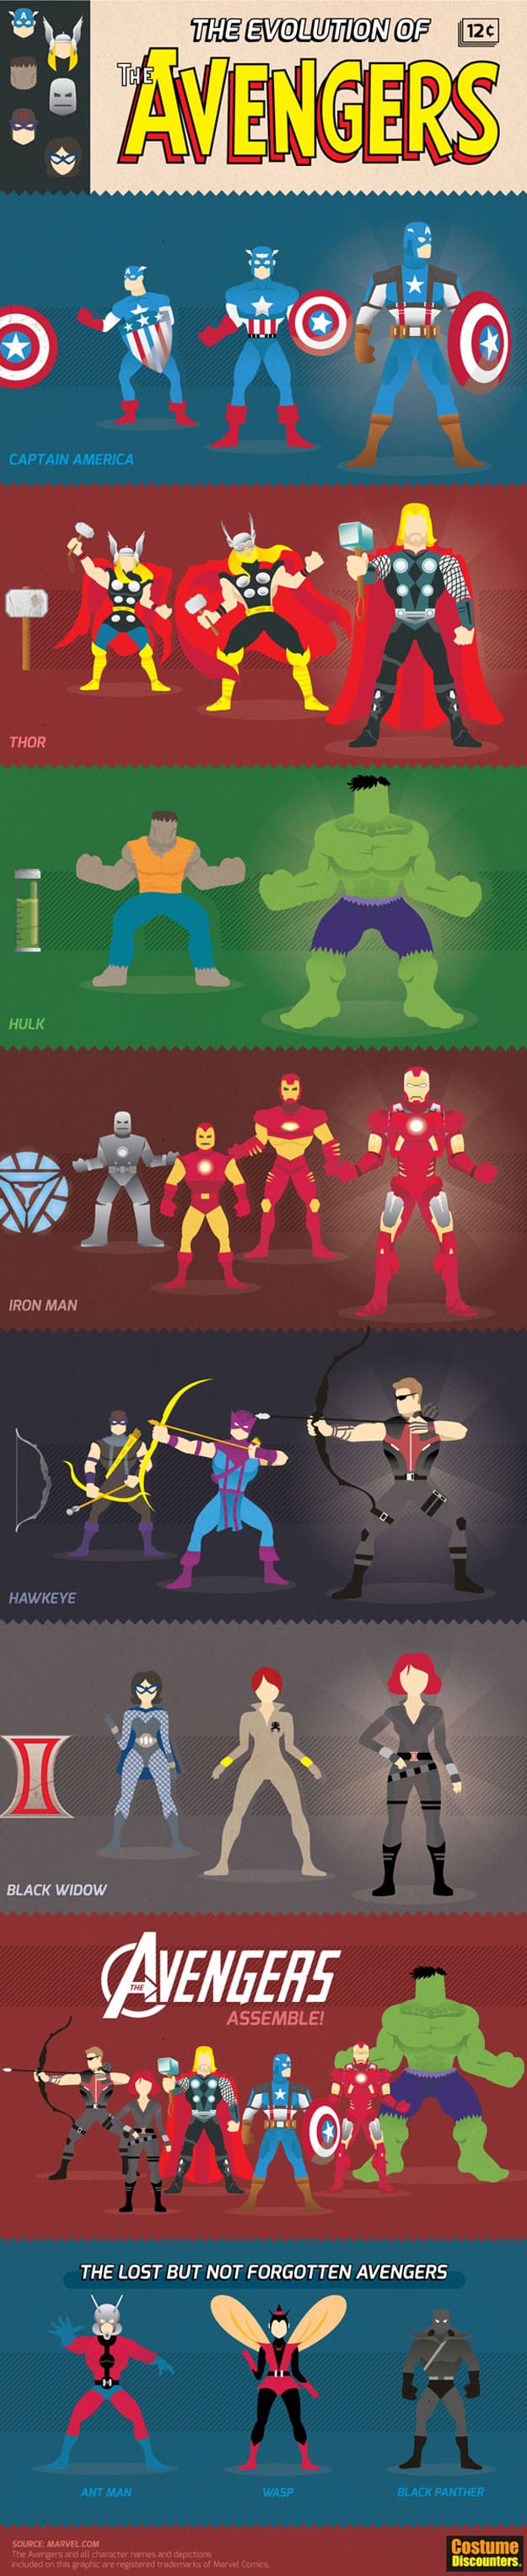 The Evolution Of The Avengers [Infographic]